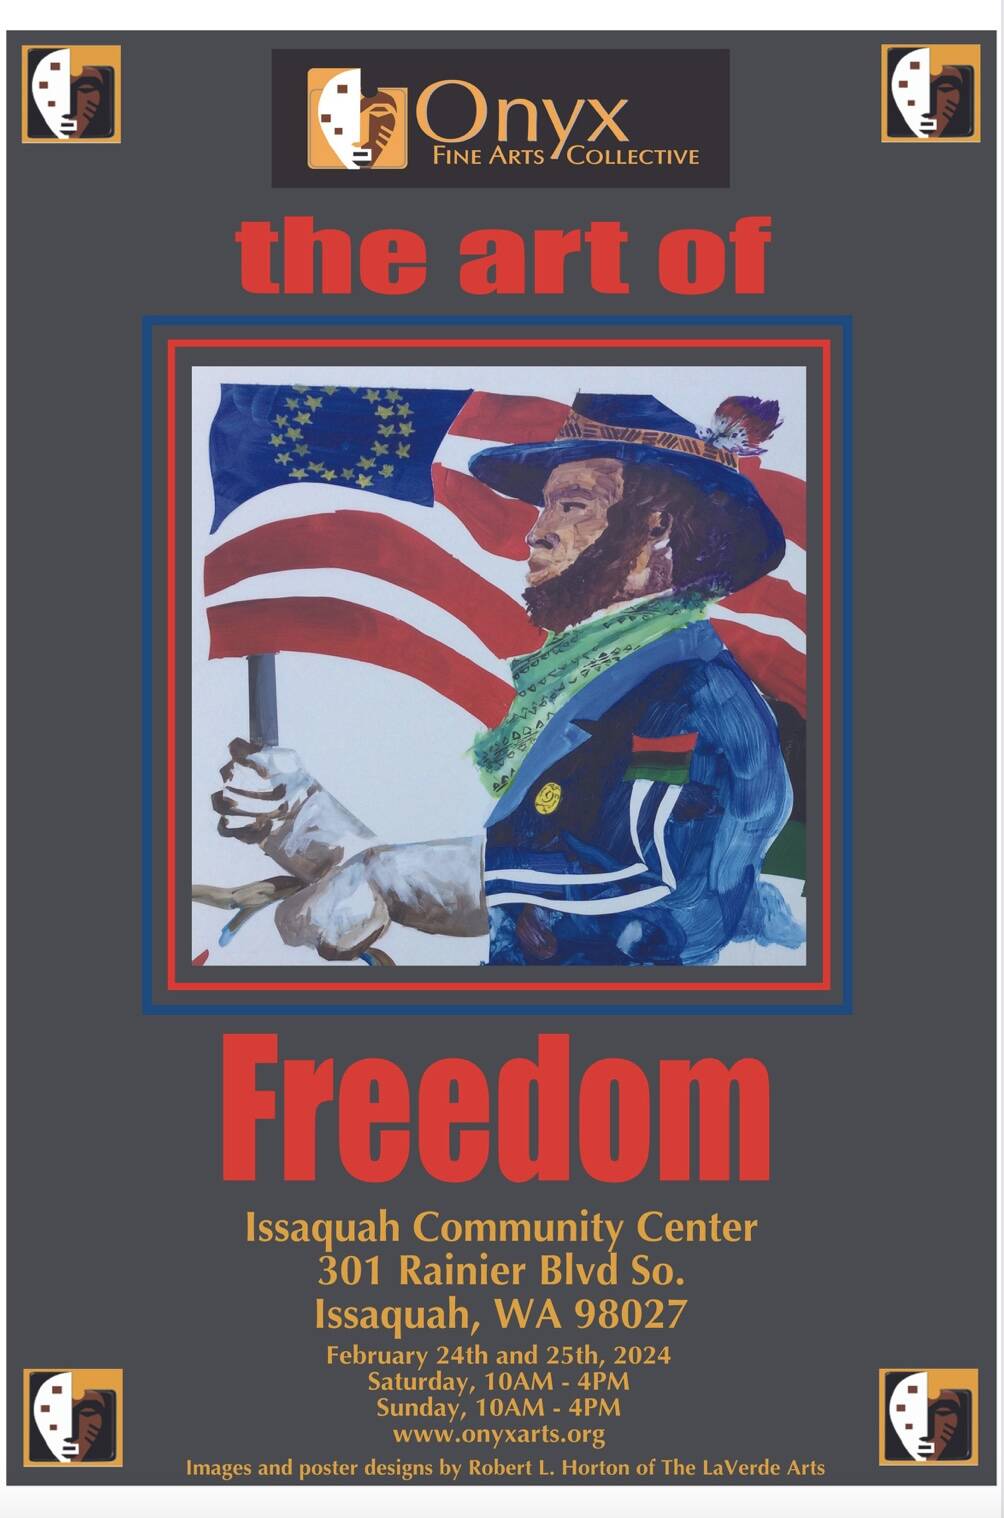 The design and artwork displayed on the exhibit’s poster created by Robert Horton. (Courtesy of Onyx Fine Arts Collective)